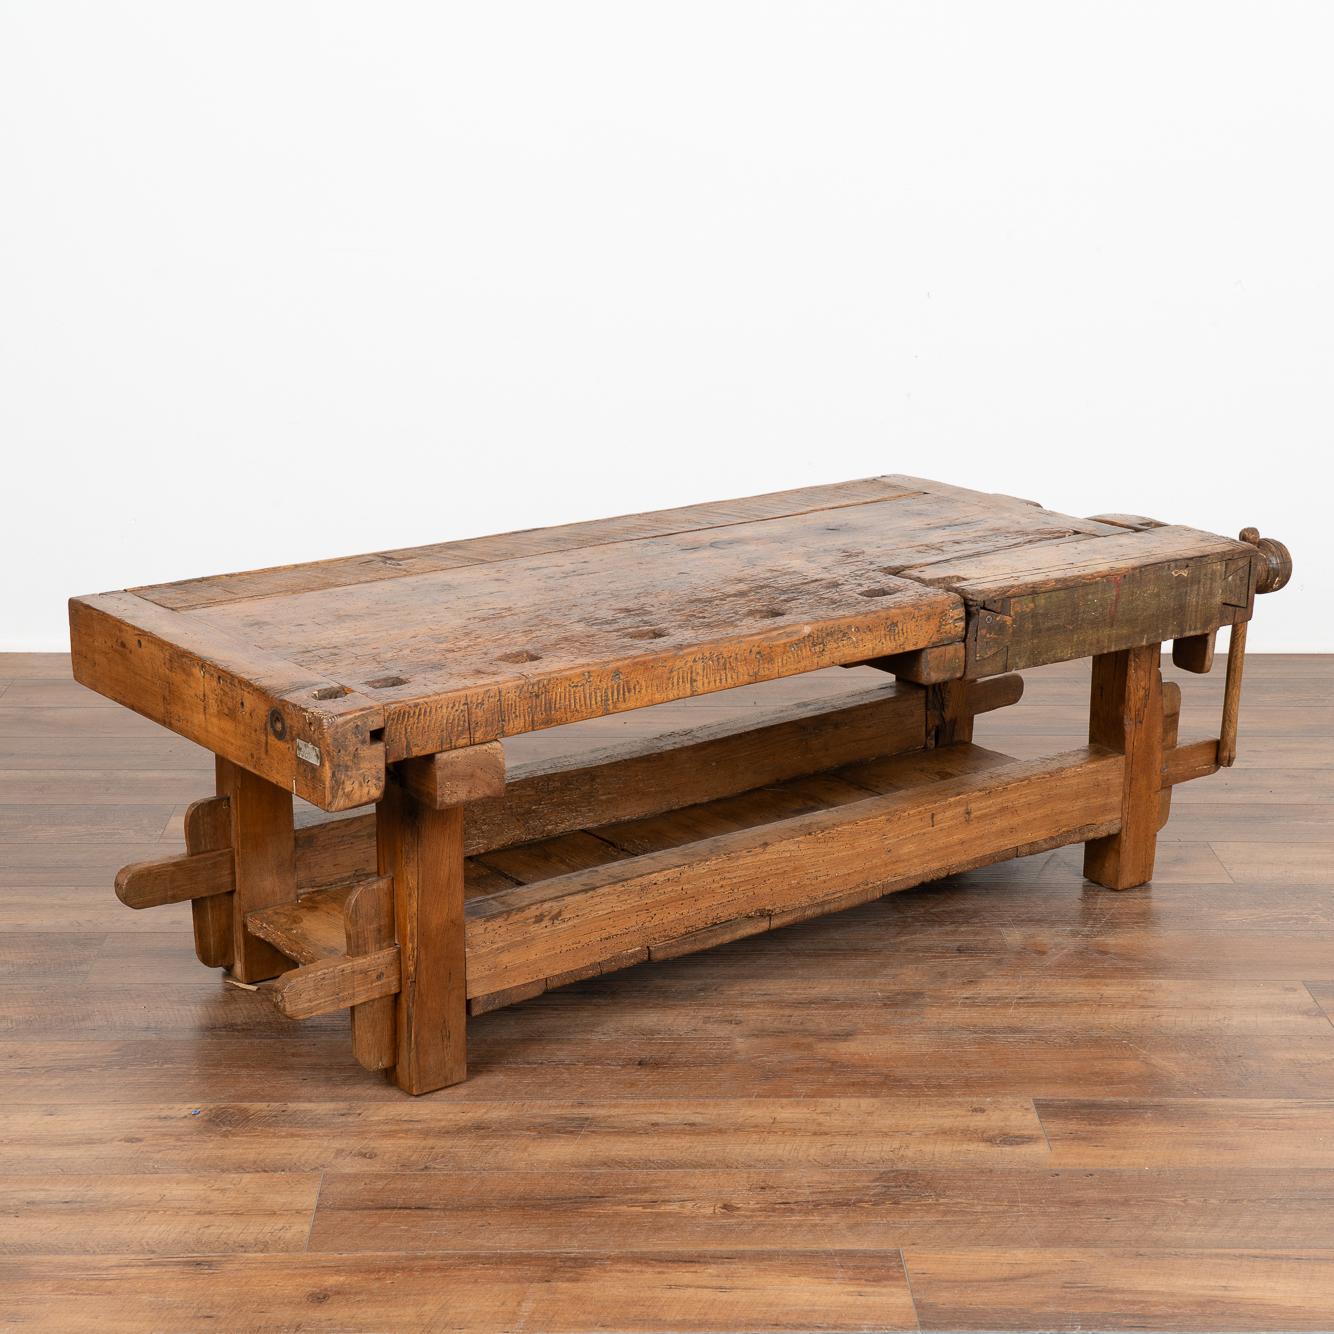 This rustic coffee table is a rare find. It was formed from a large, old carpenter's workbench and scaled down to coffee table height. 
It is the years of constant use revealed in every ding, gouge, old dried worm hole and stain that enrich the